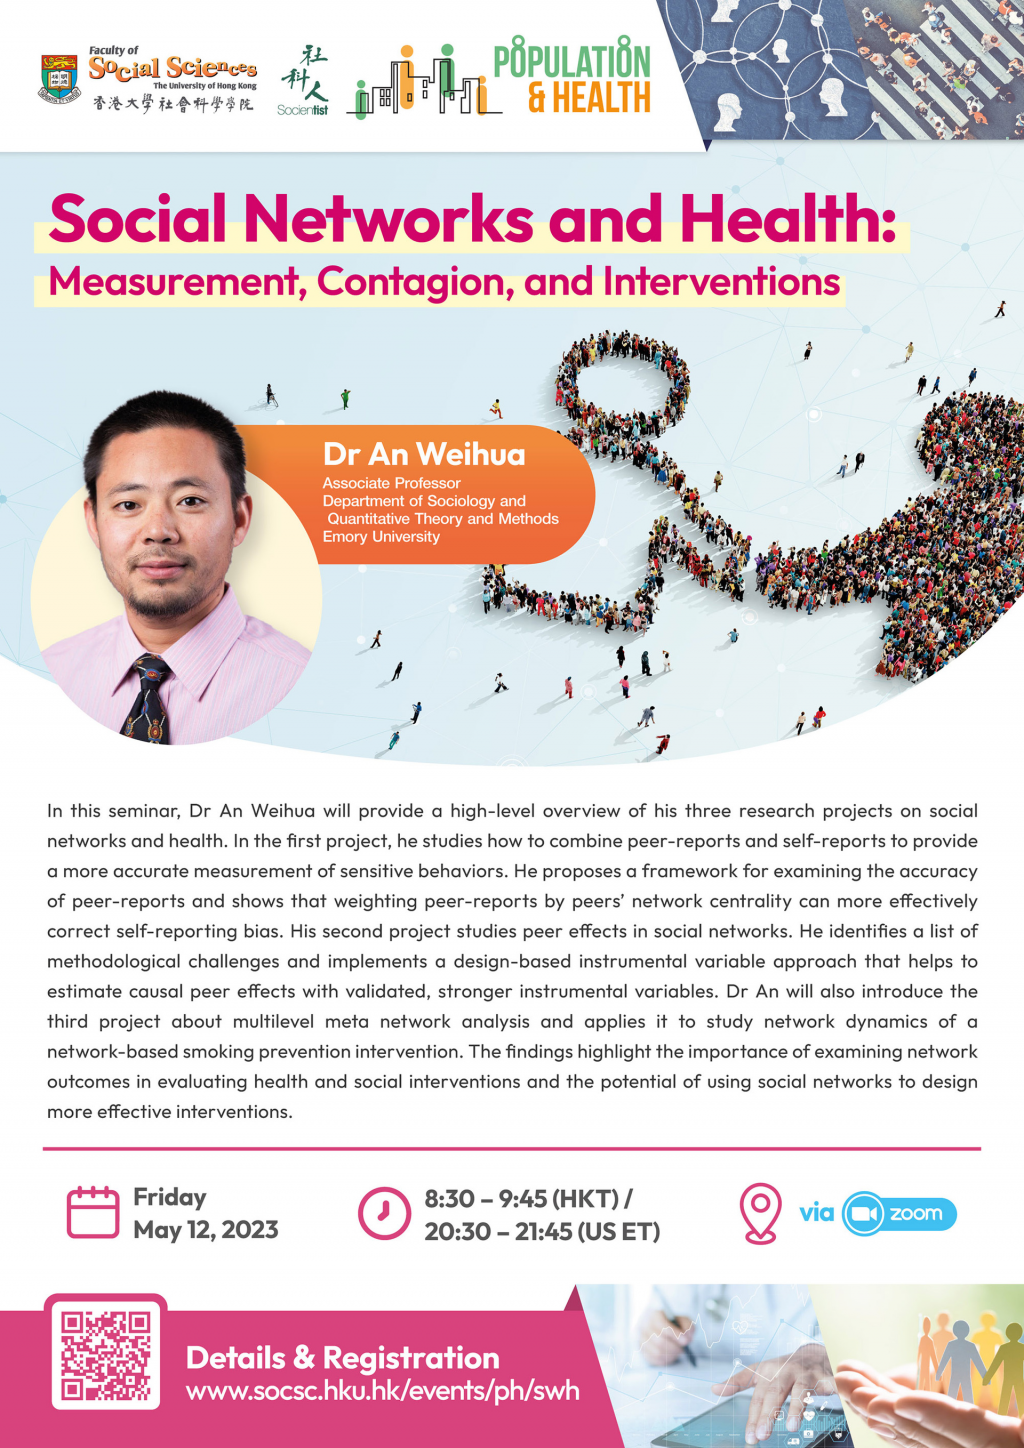 Social Networks and Health: Measurement, Contagion, and Interventions